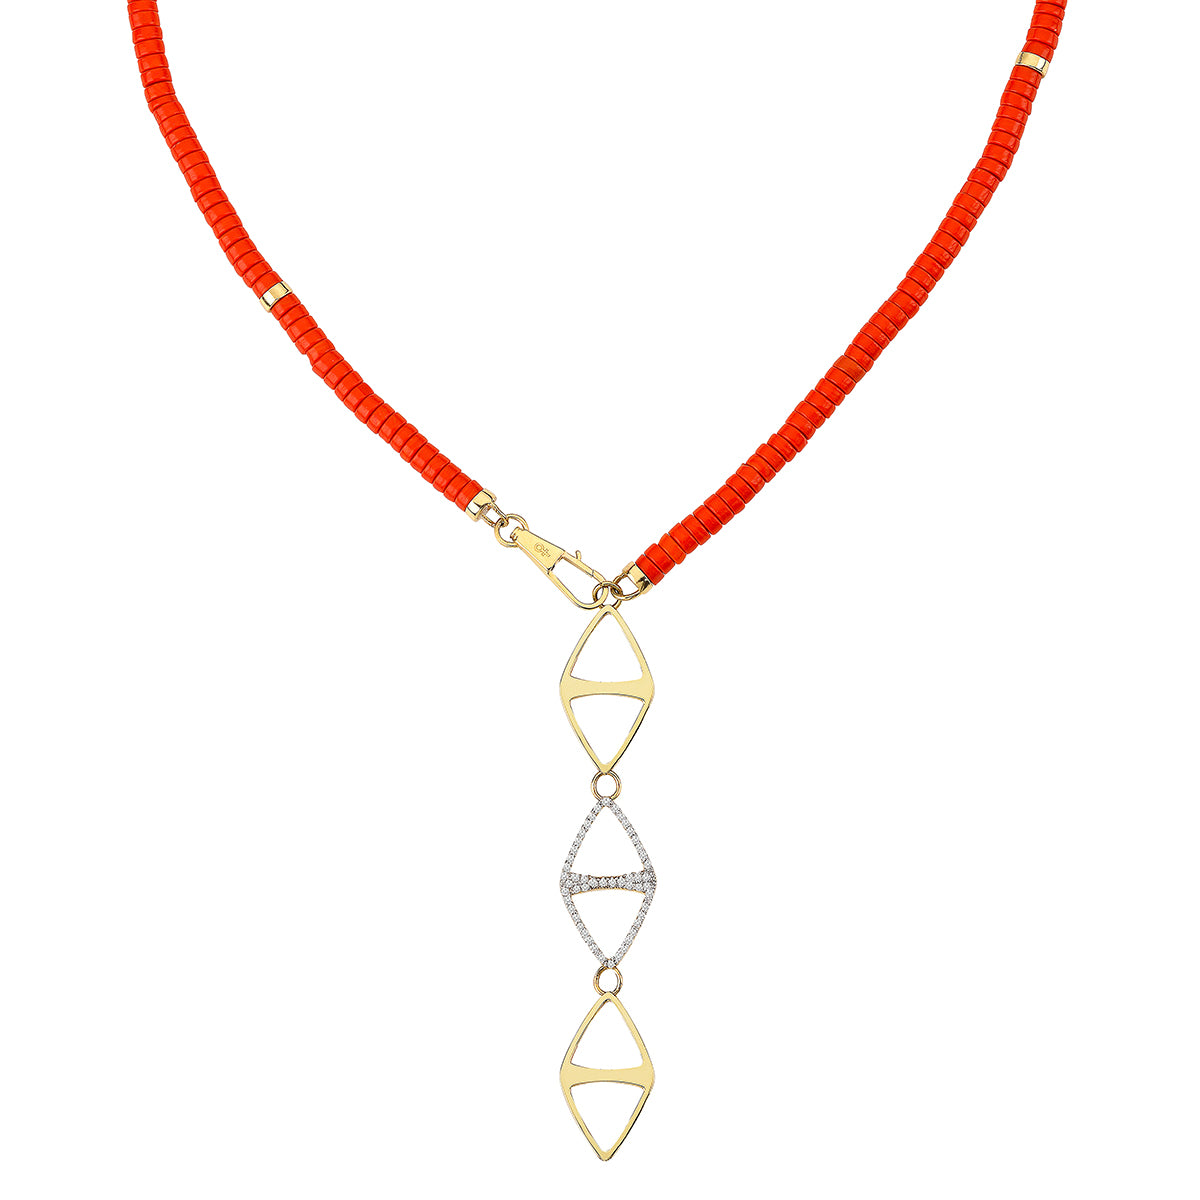 Fusion Stone Necklaces in Yellow Gold - Her Story Shop